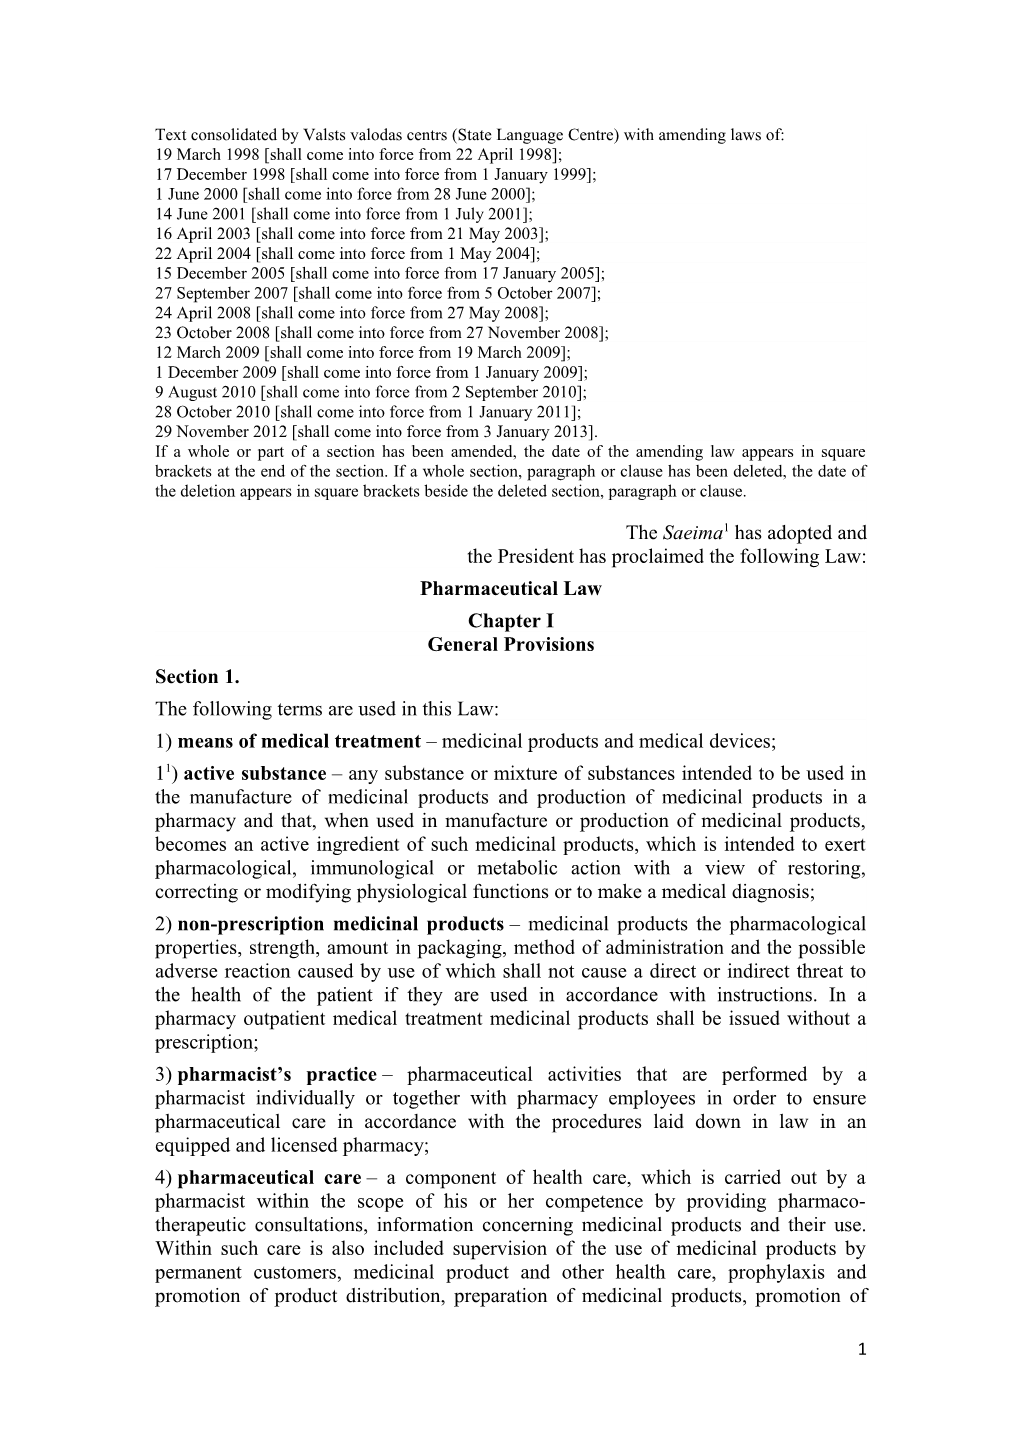 Text Consolidated by Valsts Valodas Centrs (State Language Centre) with Amending Laws Of s14